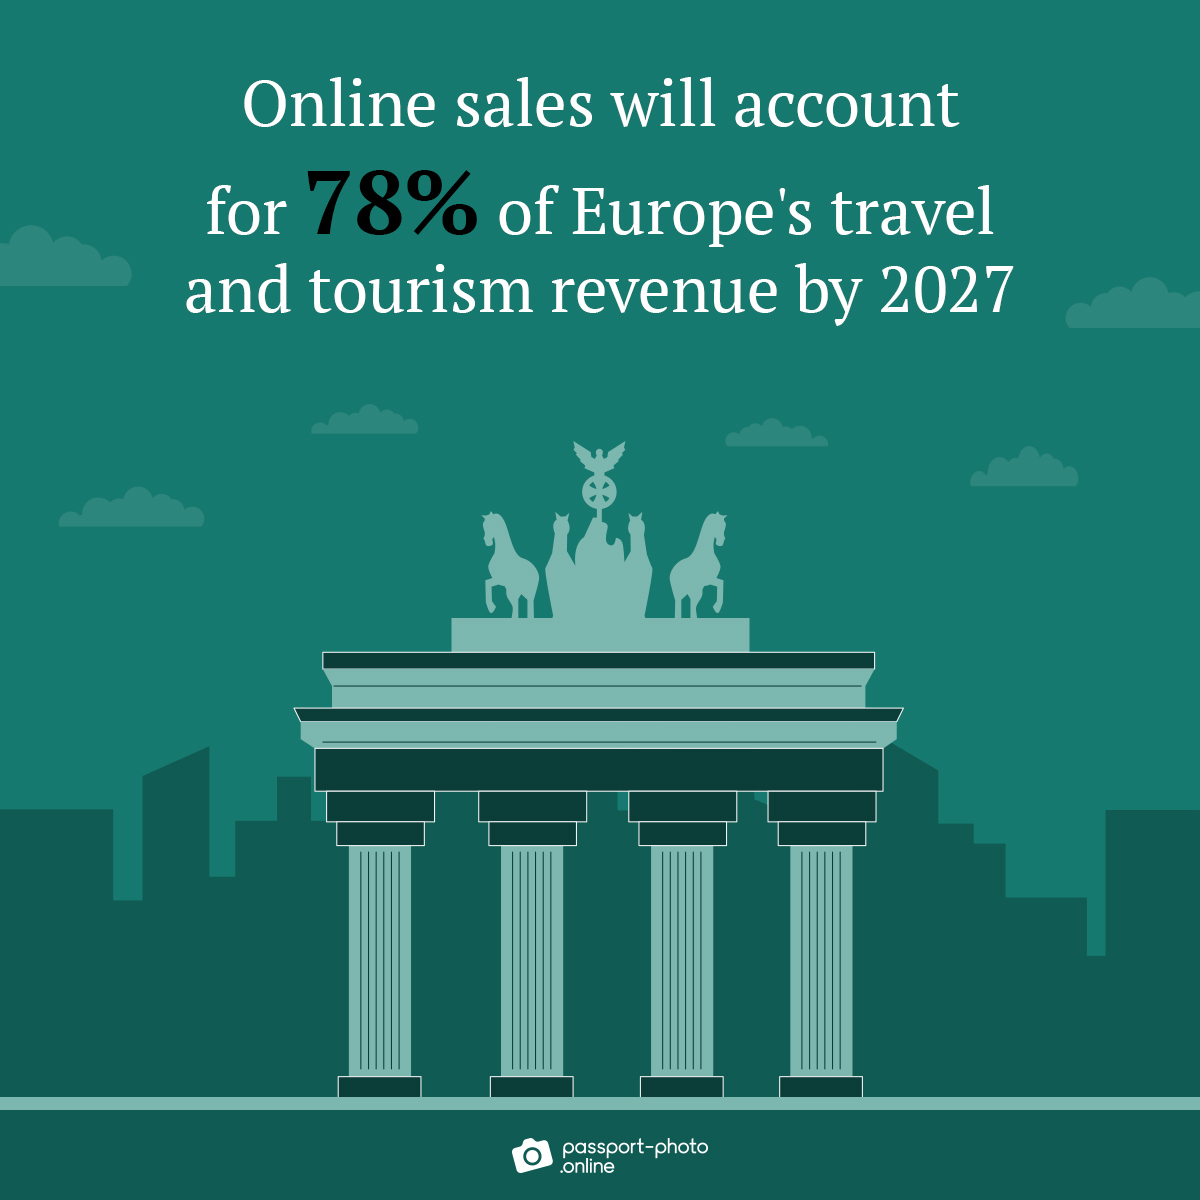 78% of Europe's travel and tourism revenue will come from online sales